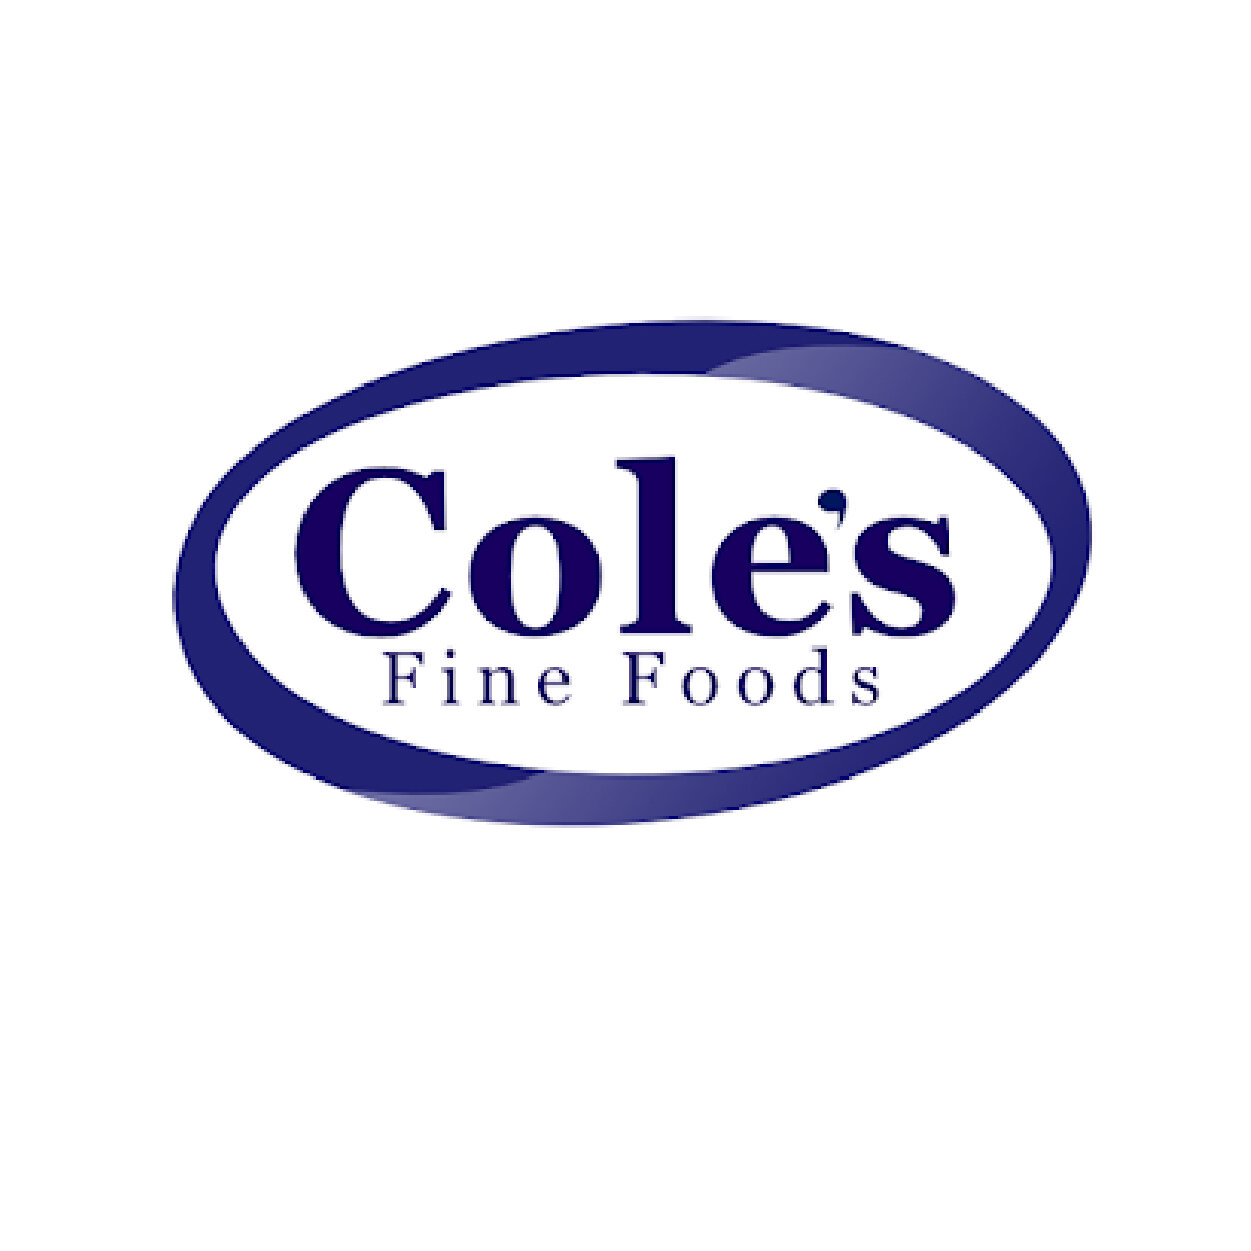 Coles Cafe and Bakery